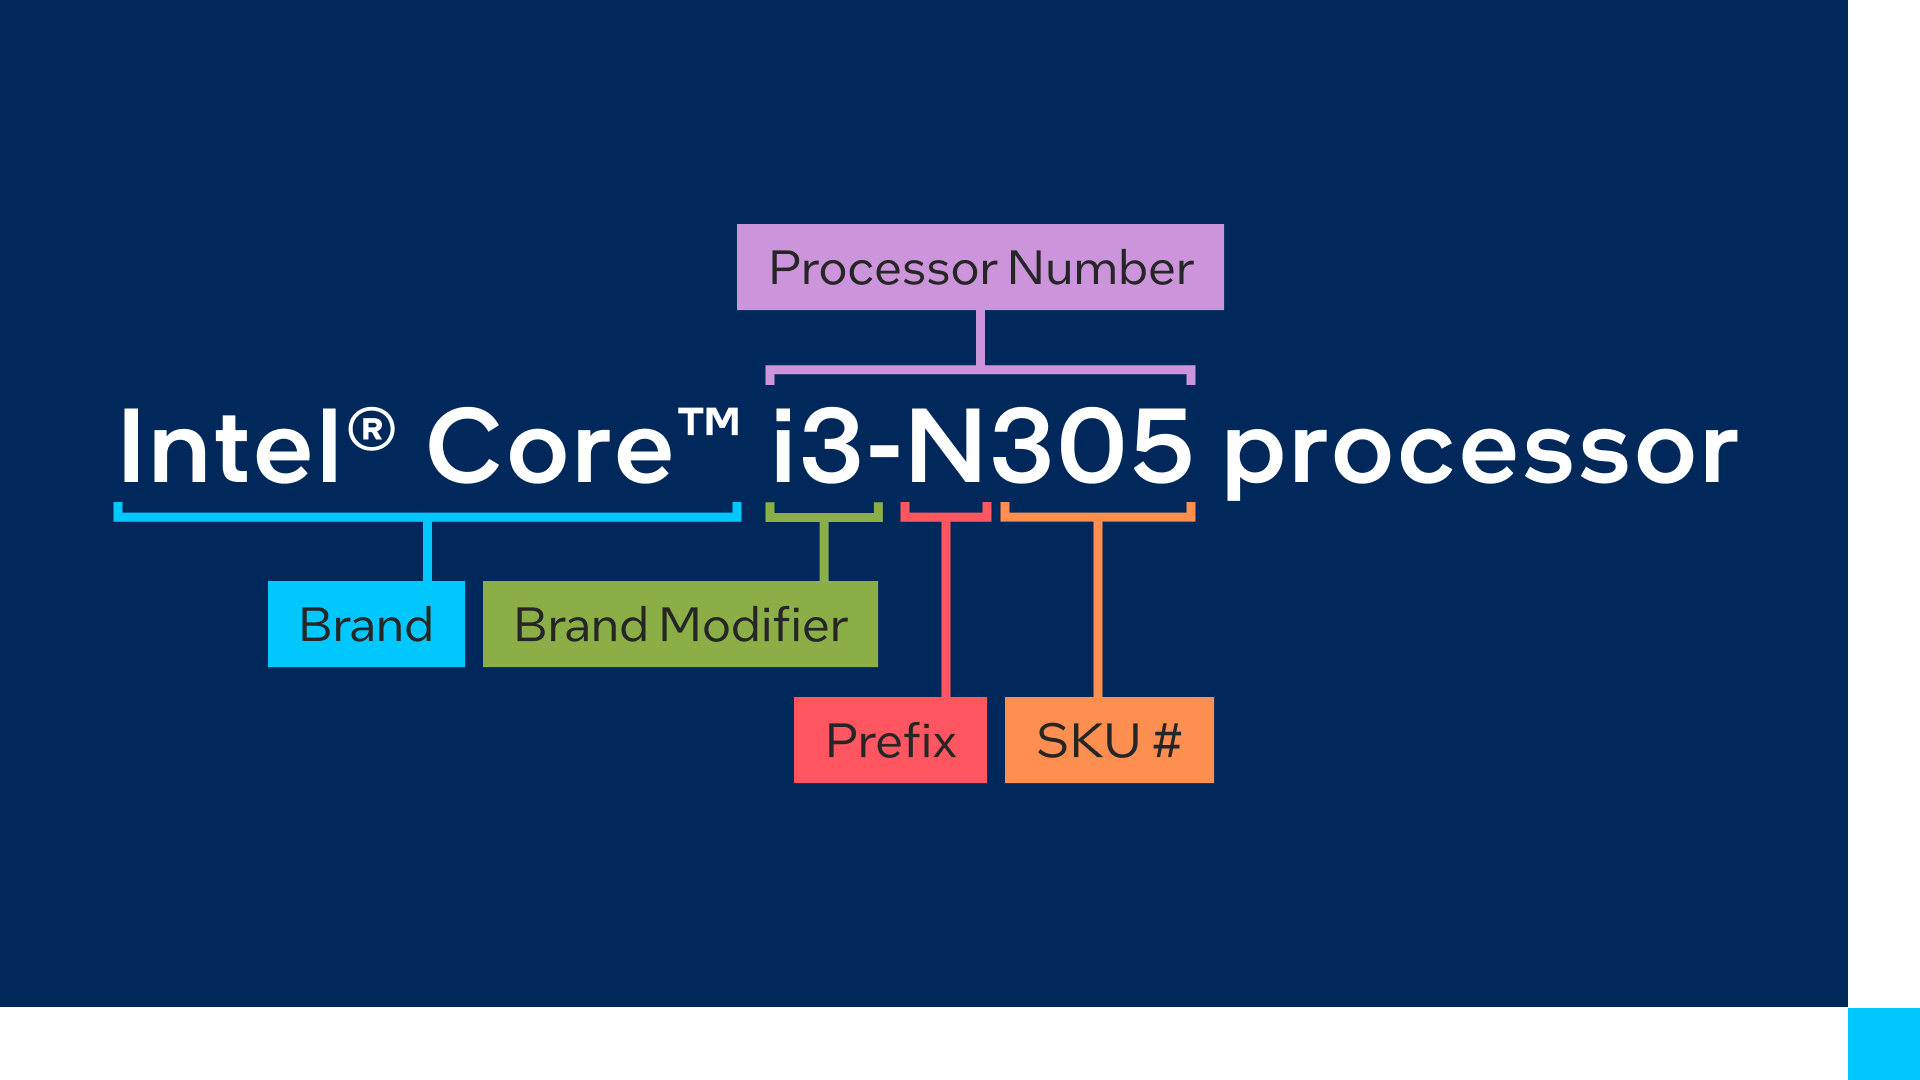 intel core processor n-series naming scheme details in a picture